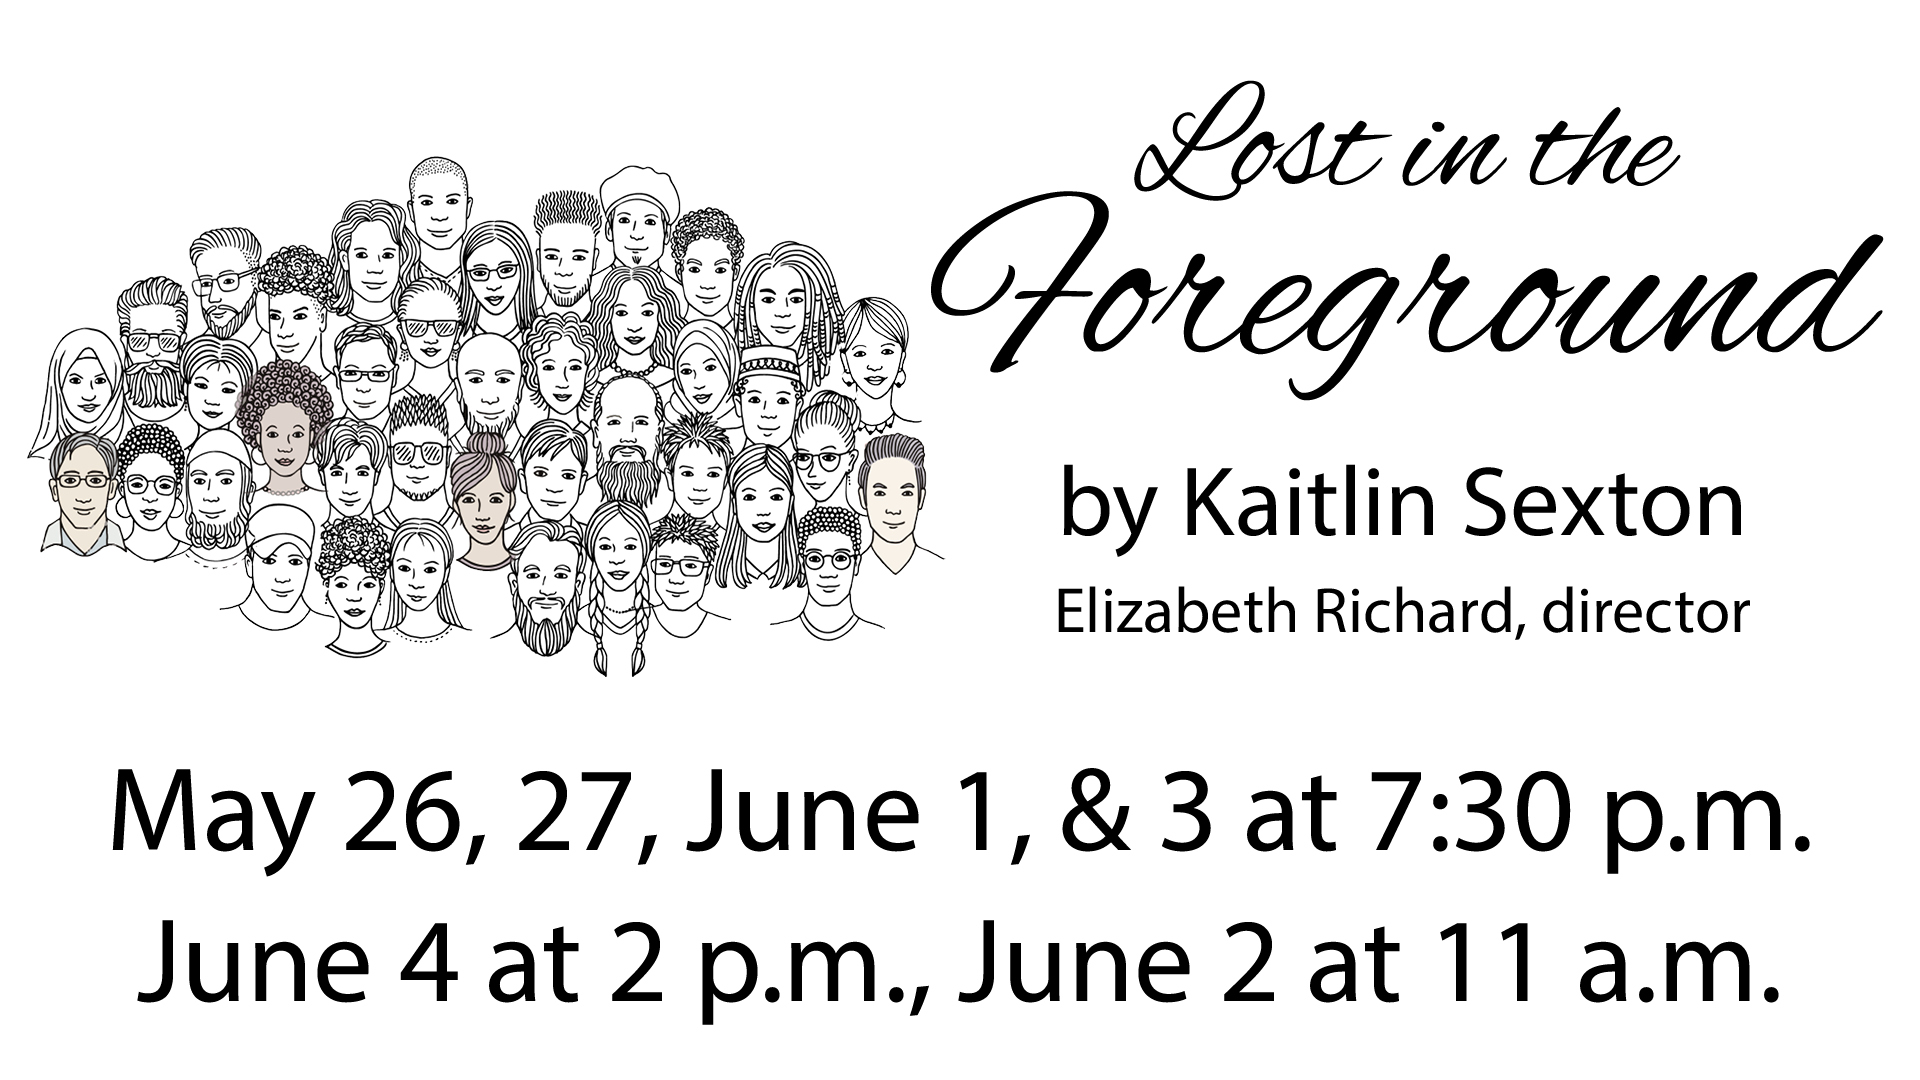 Poster of Lost in the Foreground by Kaitlin Sexton, Director Elizabeth Richard on May 26,27, June 1,3 at 7:30pm and June 4 at 2pm and June 2 at 11am